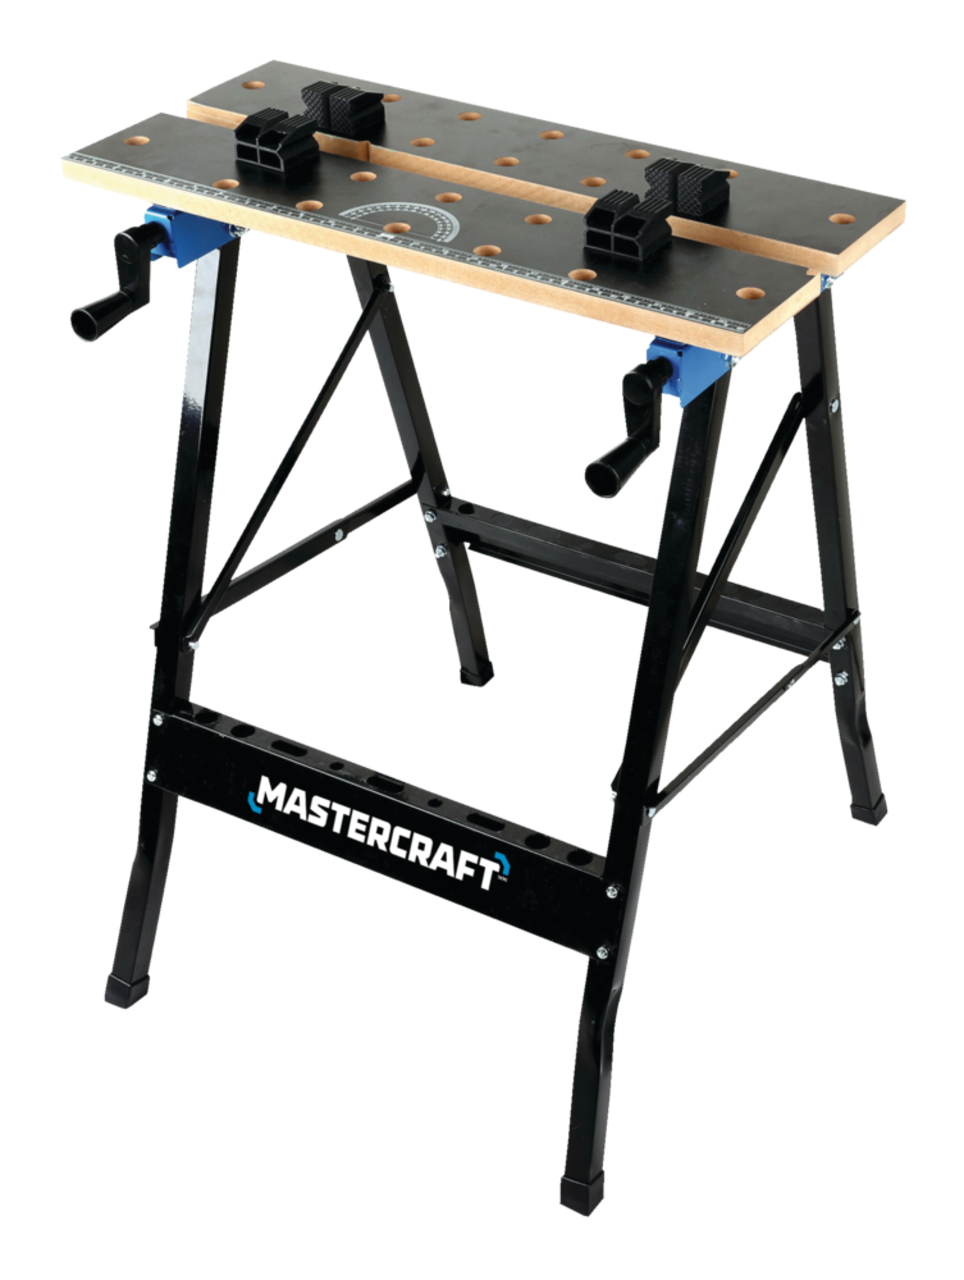 https://media-www.canadiantire.ca/product/fixing/tools/tool-storage/0570029/folding-work-table-ec4f2498-c099-4f20-a238-a9b7f752ccd3.png?imdensity=1&imwidth=640&impolicy=mZoom